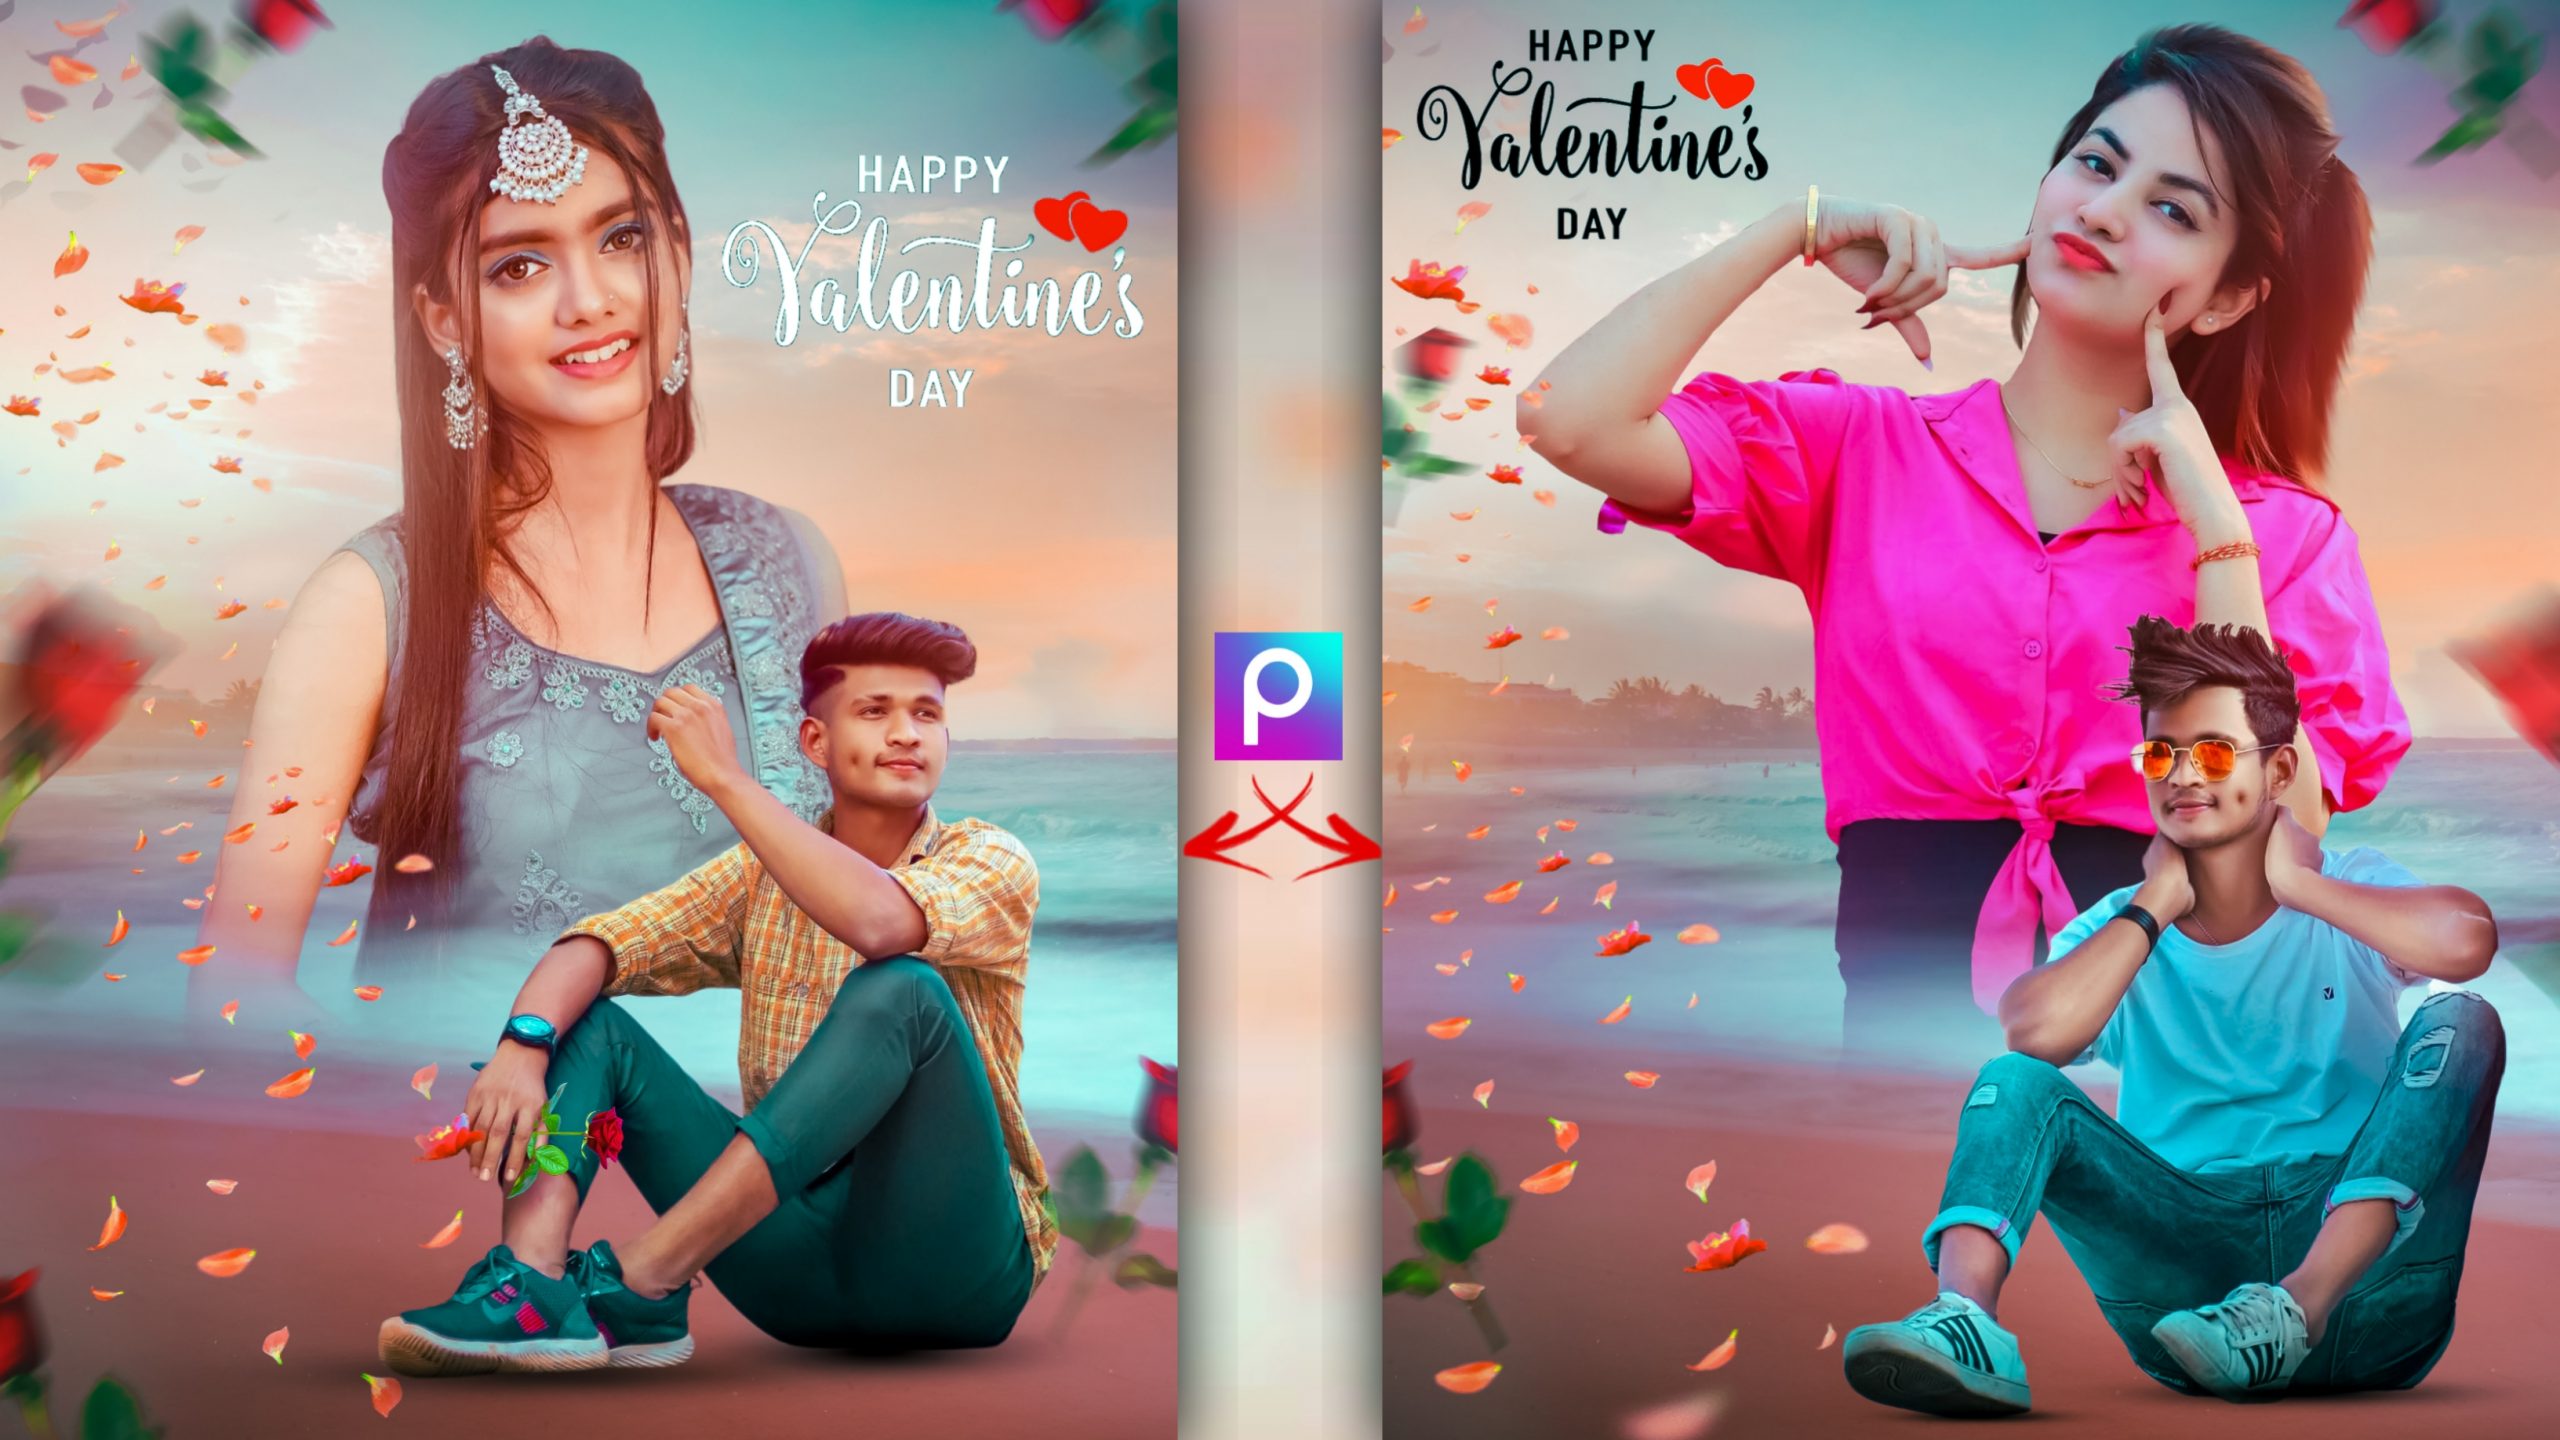 Happy Valentine Day Photo Editing Download Background And PNG - Tahir Editz